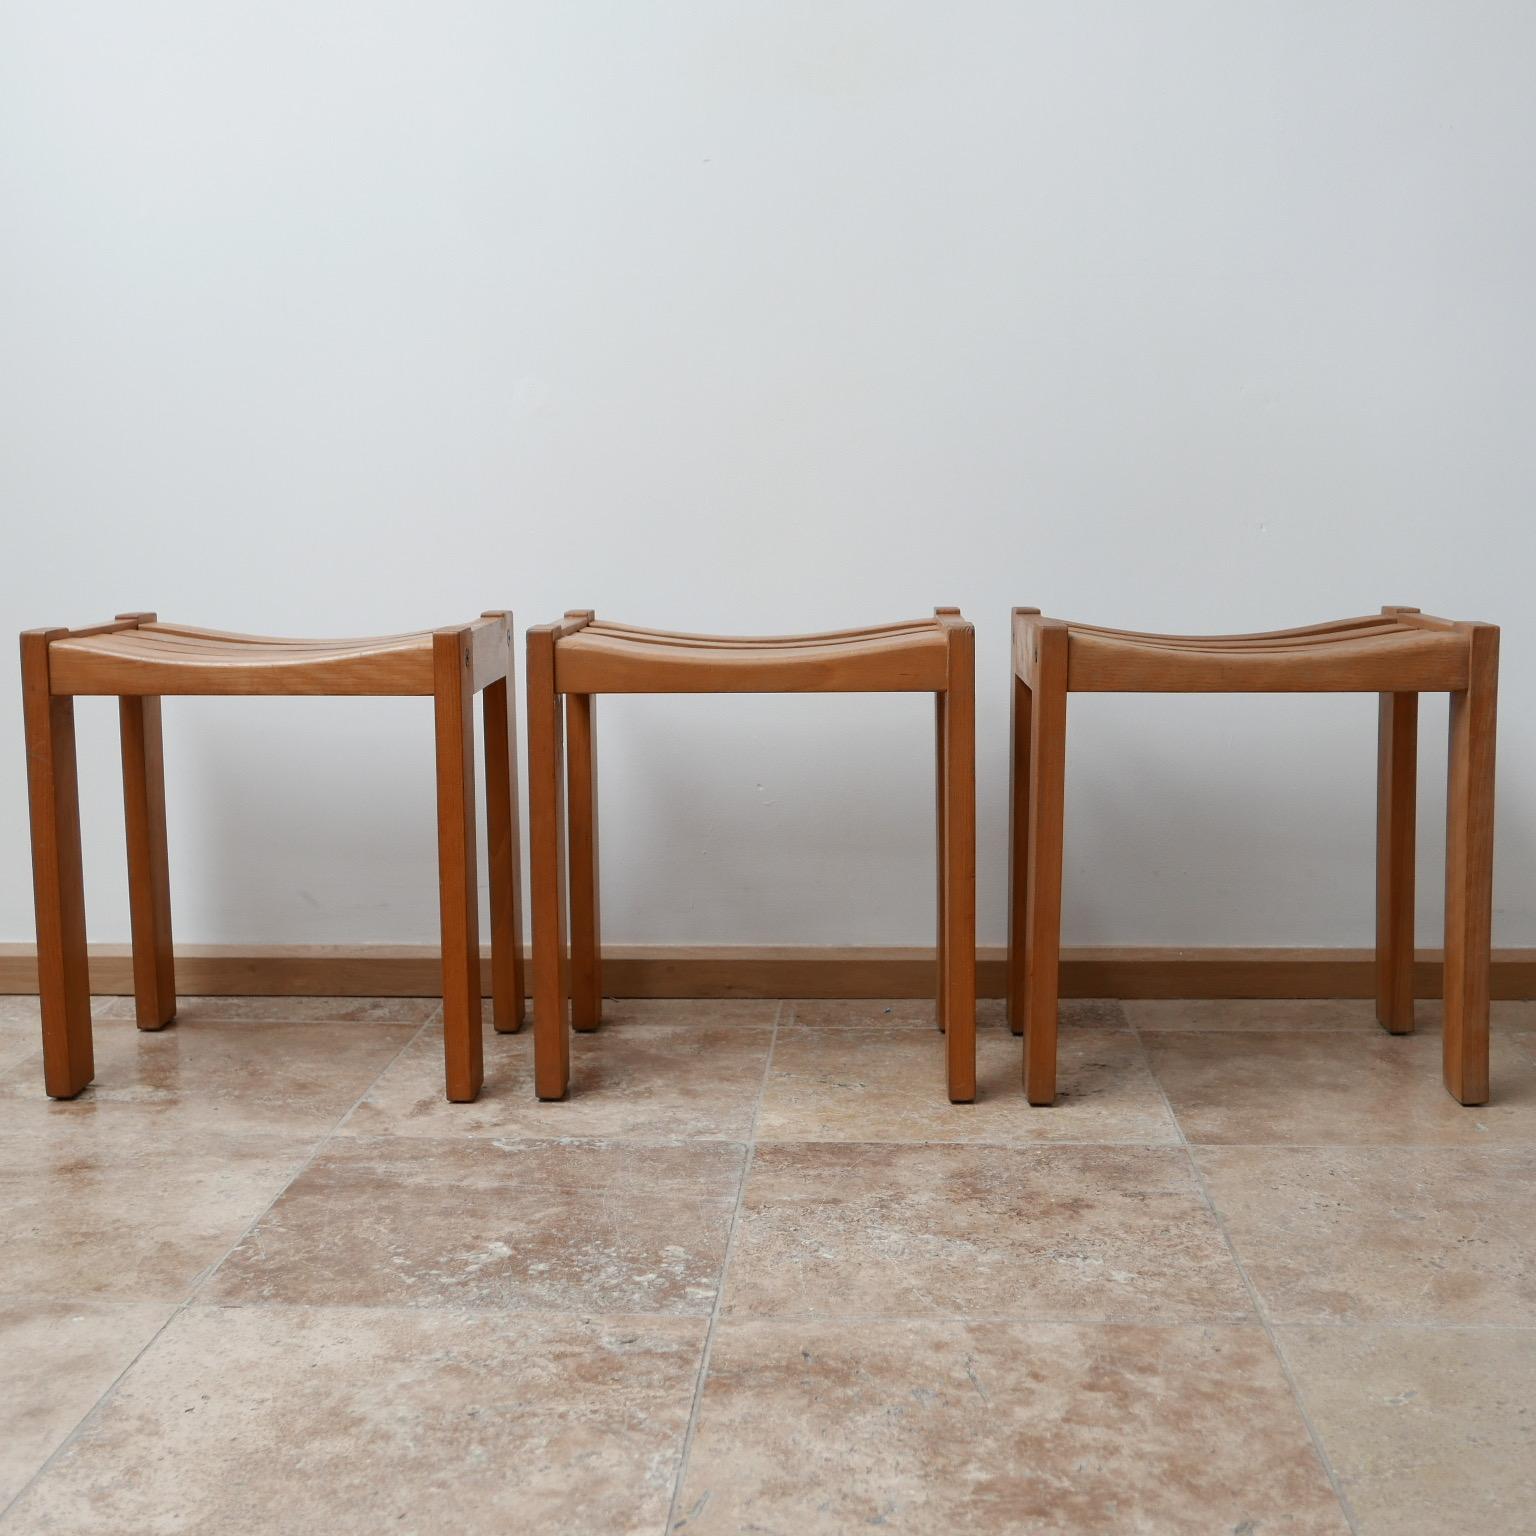 Midcentury French Blonde Oak Stools in the Manner of Guillerme et Chambron '11' For Sale 4